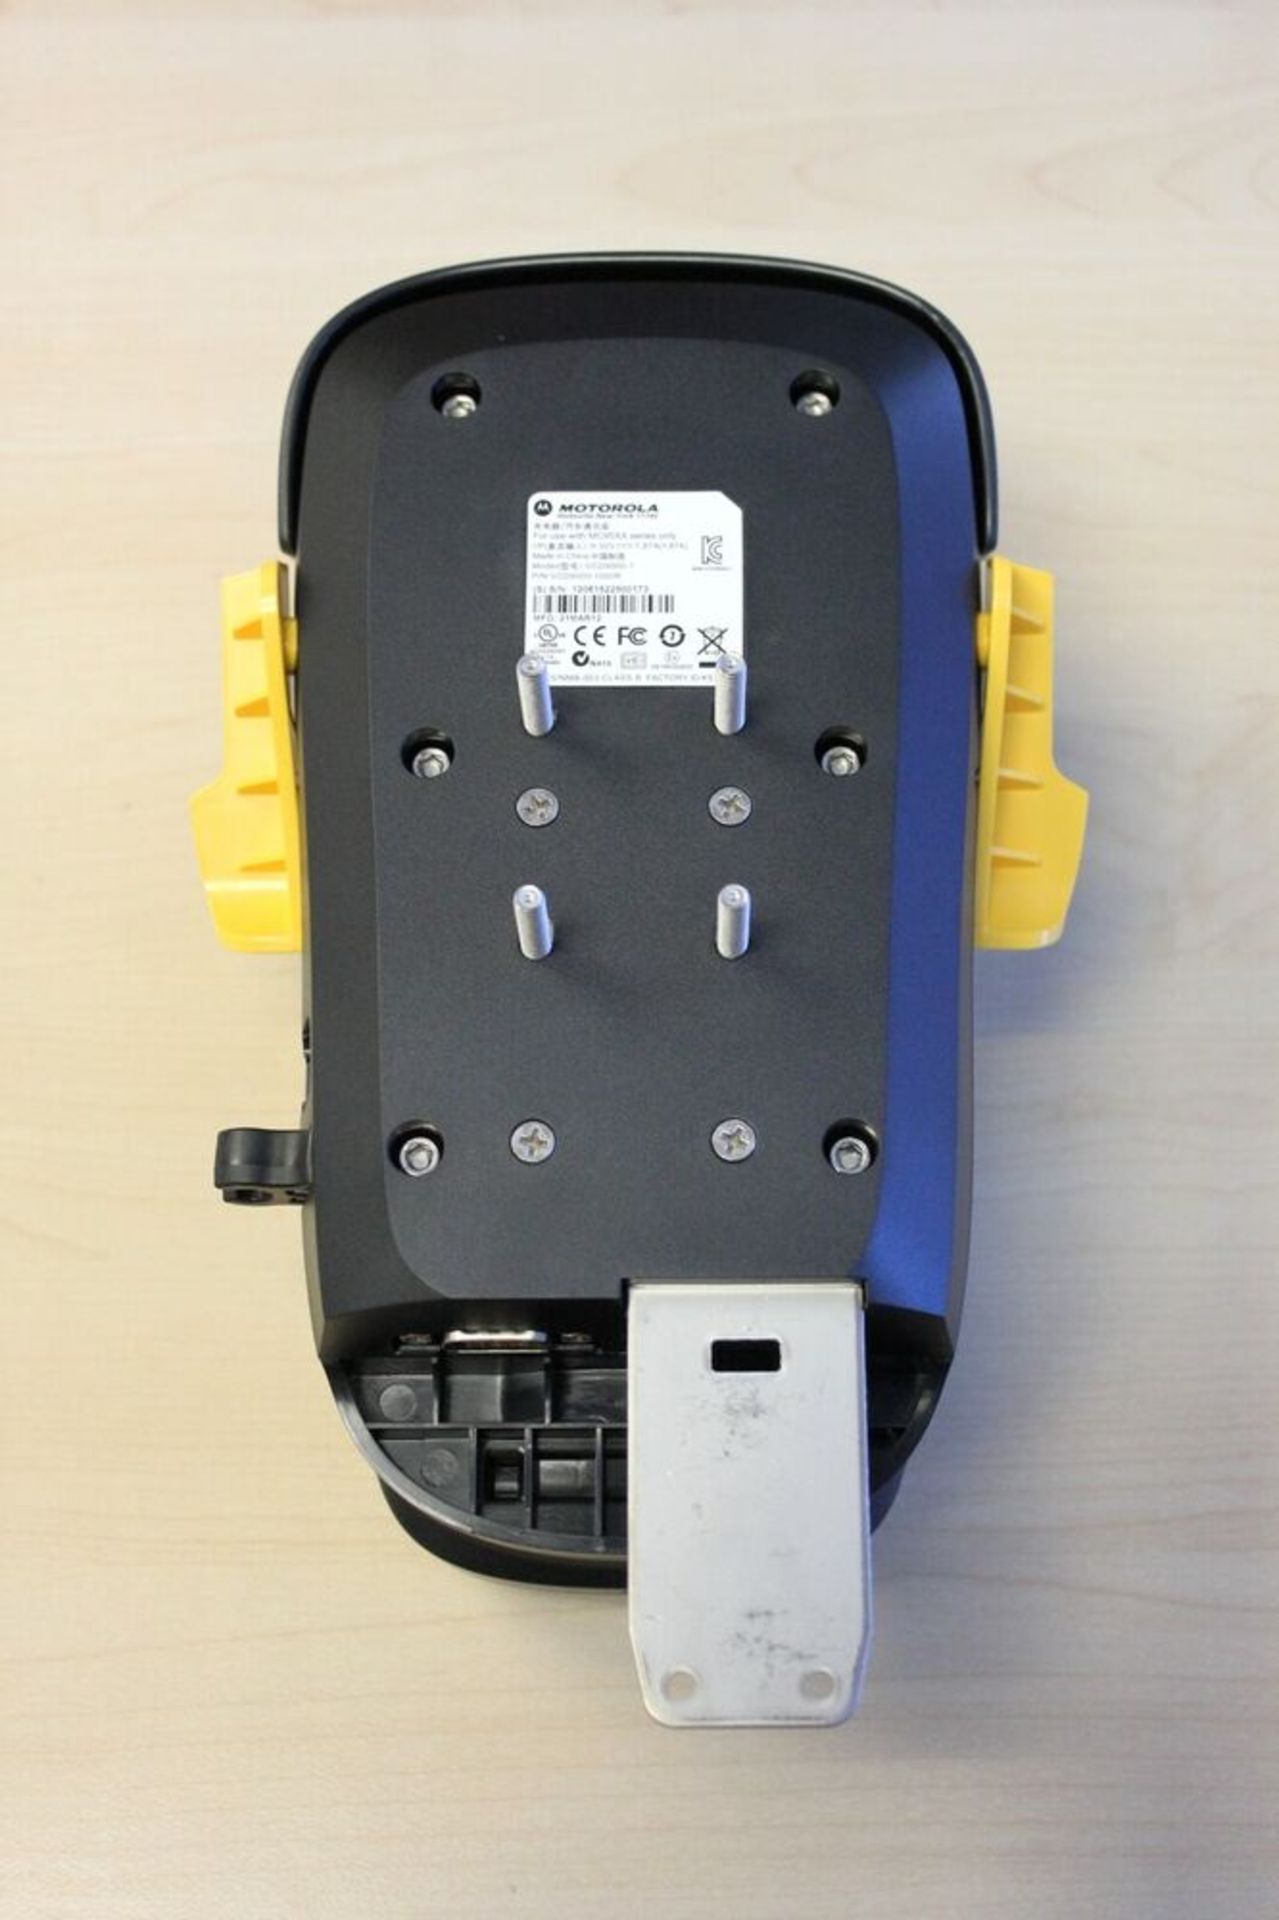 New Motorola VCD9500-1000R Vehicle One Slot Cradle for MC9500 with Accessories - Image 4 of 4